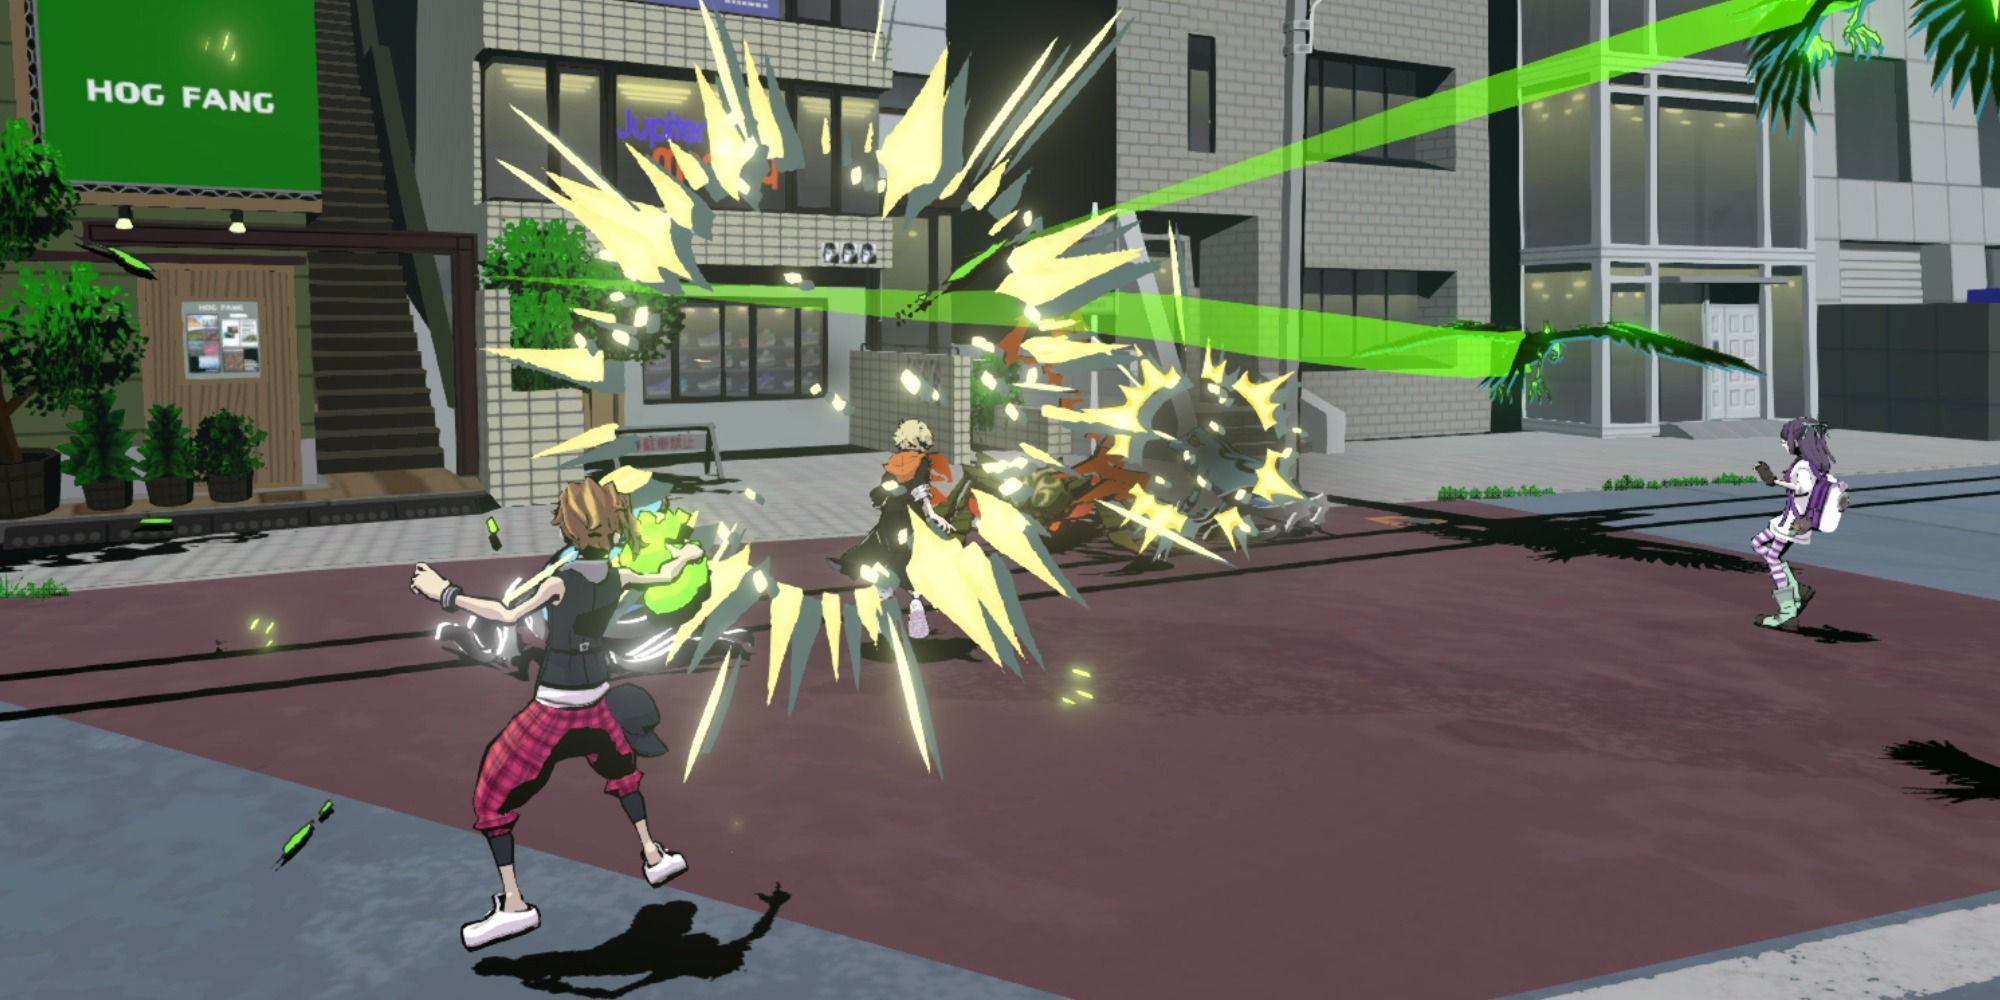 Fret launching attacks on the enemy from a distance with the Raven Pin in Neo: The World Ends With You